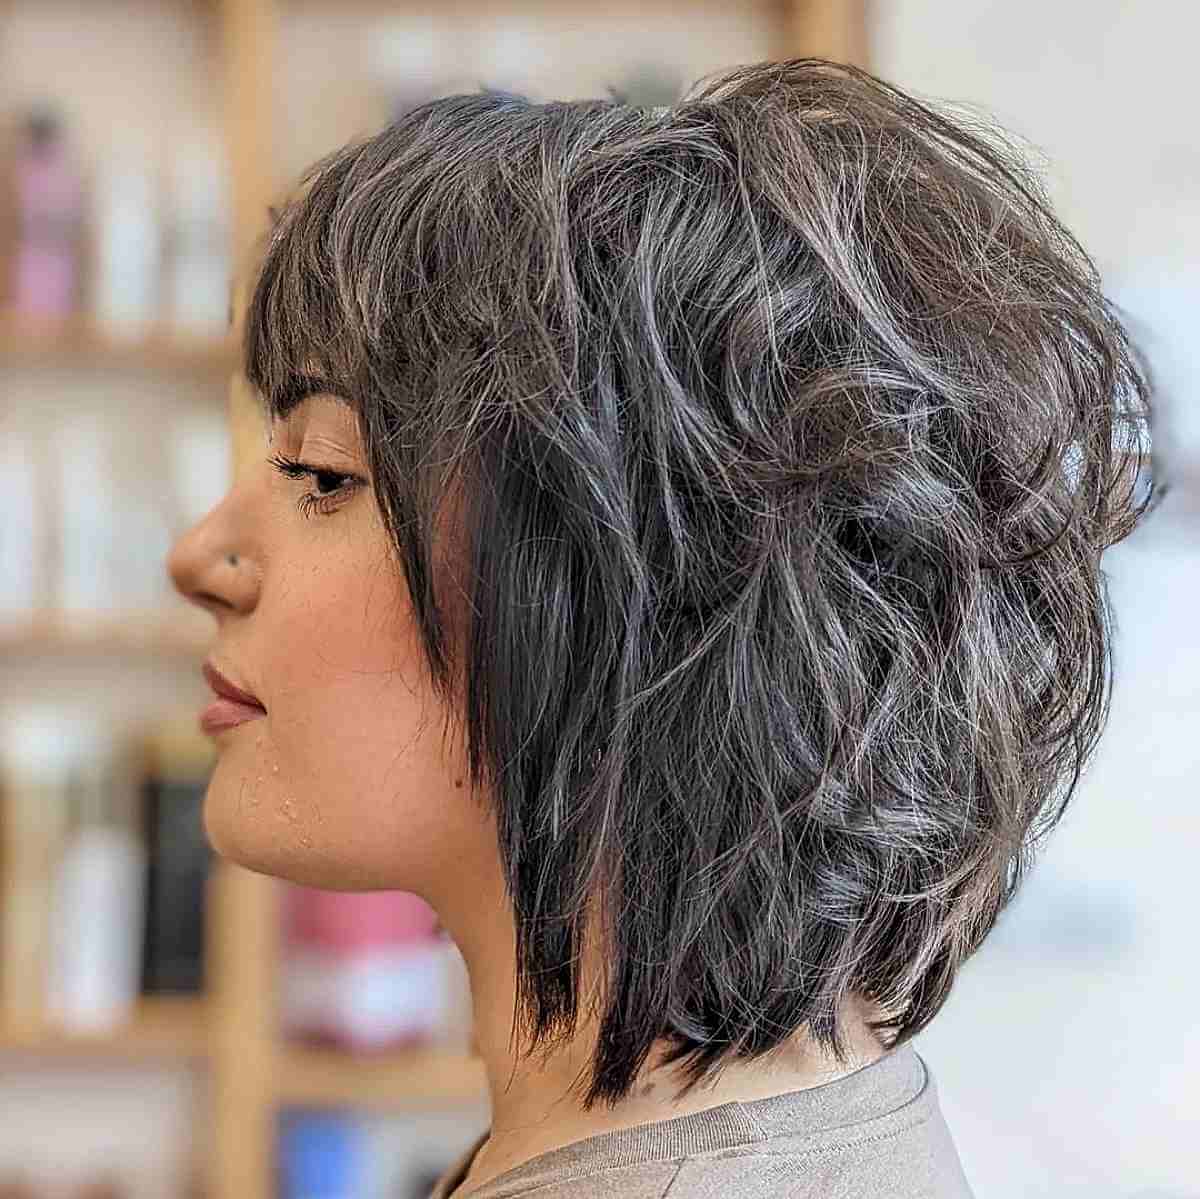 50 Top Short Hairstyles for Thick Hair to Be More Manageable